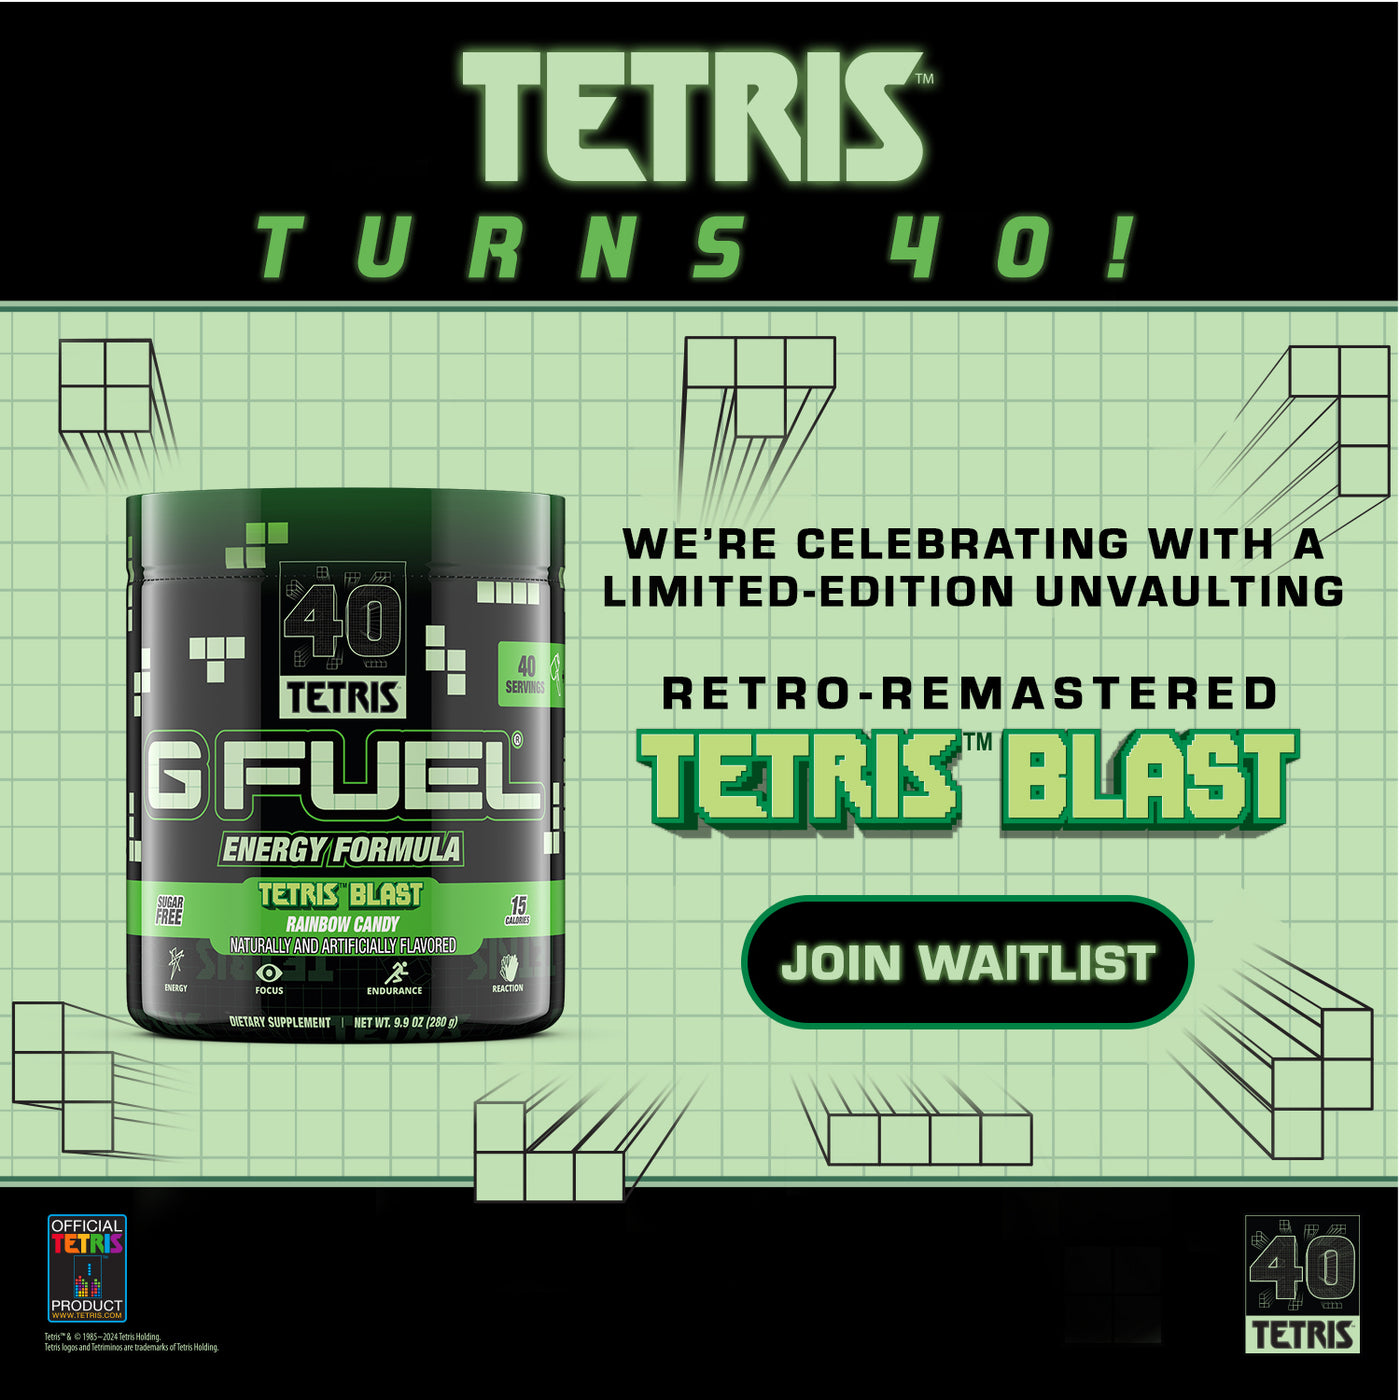 Tetris Turns 40! We're Celebrating with a Limited-Edition Unvaulting of Tetris Blast!